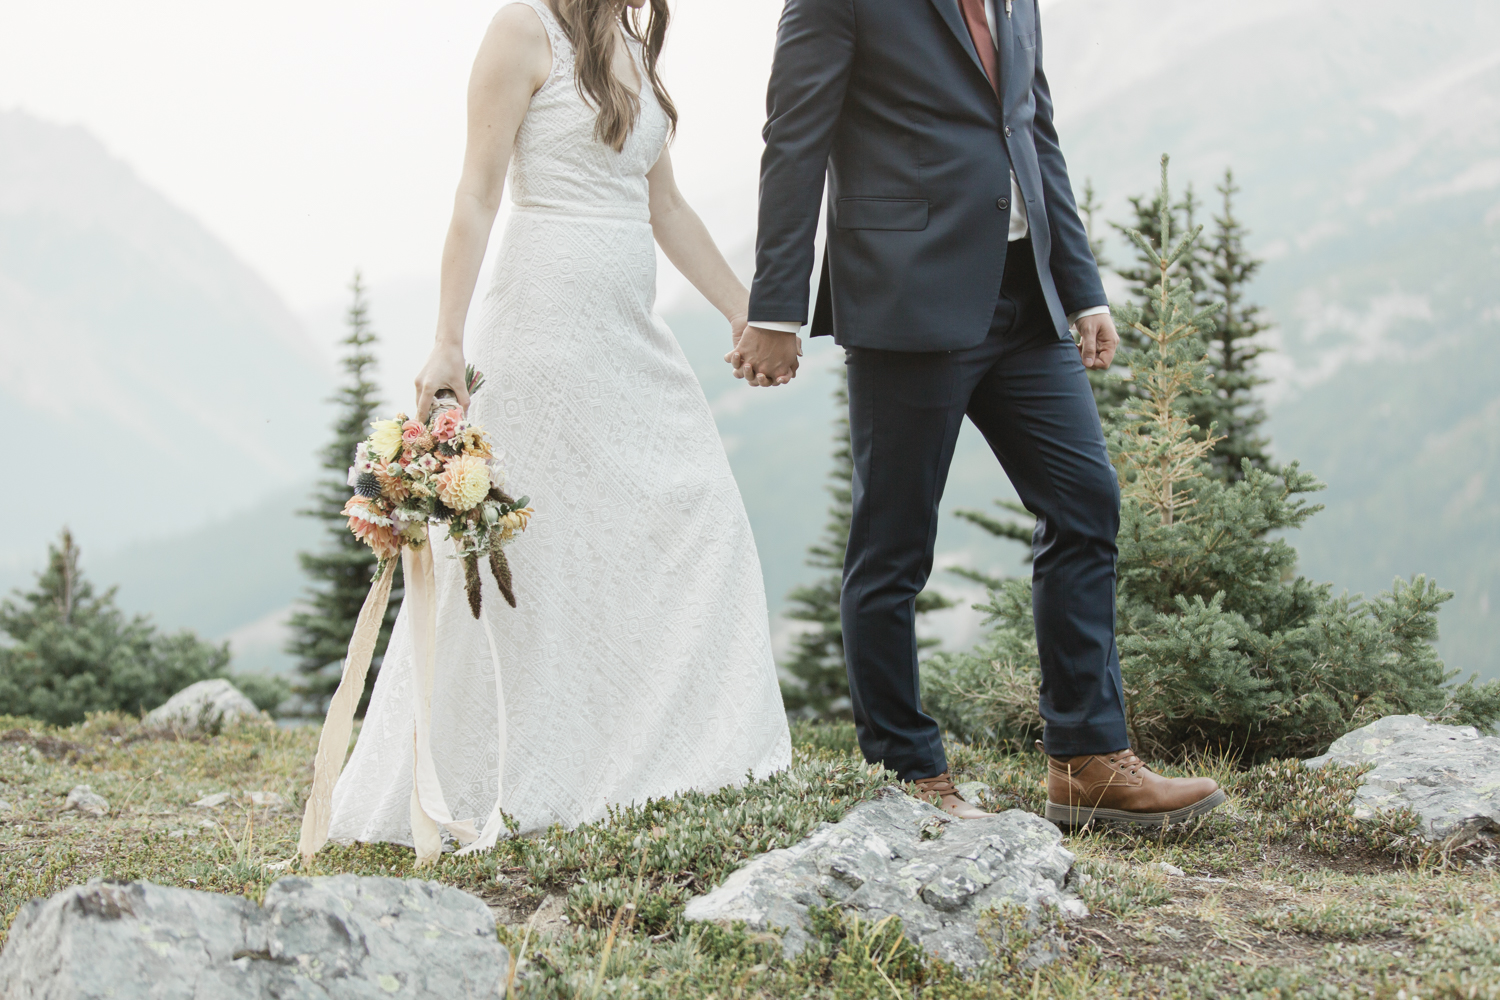 Banff Helicopter Elopement. Banff Elopement Photographer. A private and romantic wedding. 